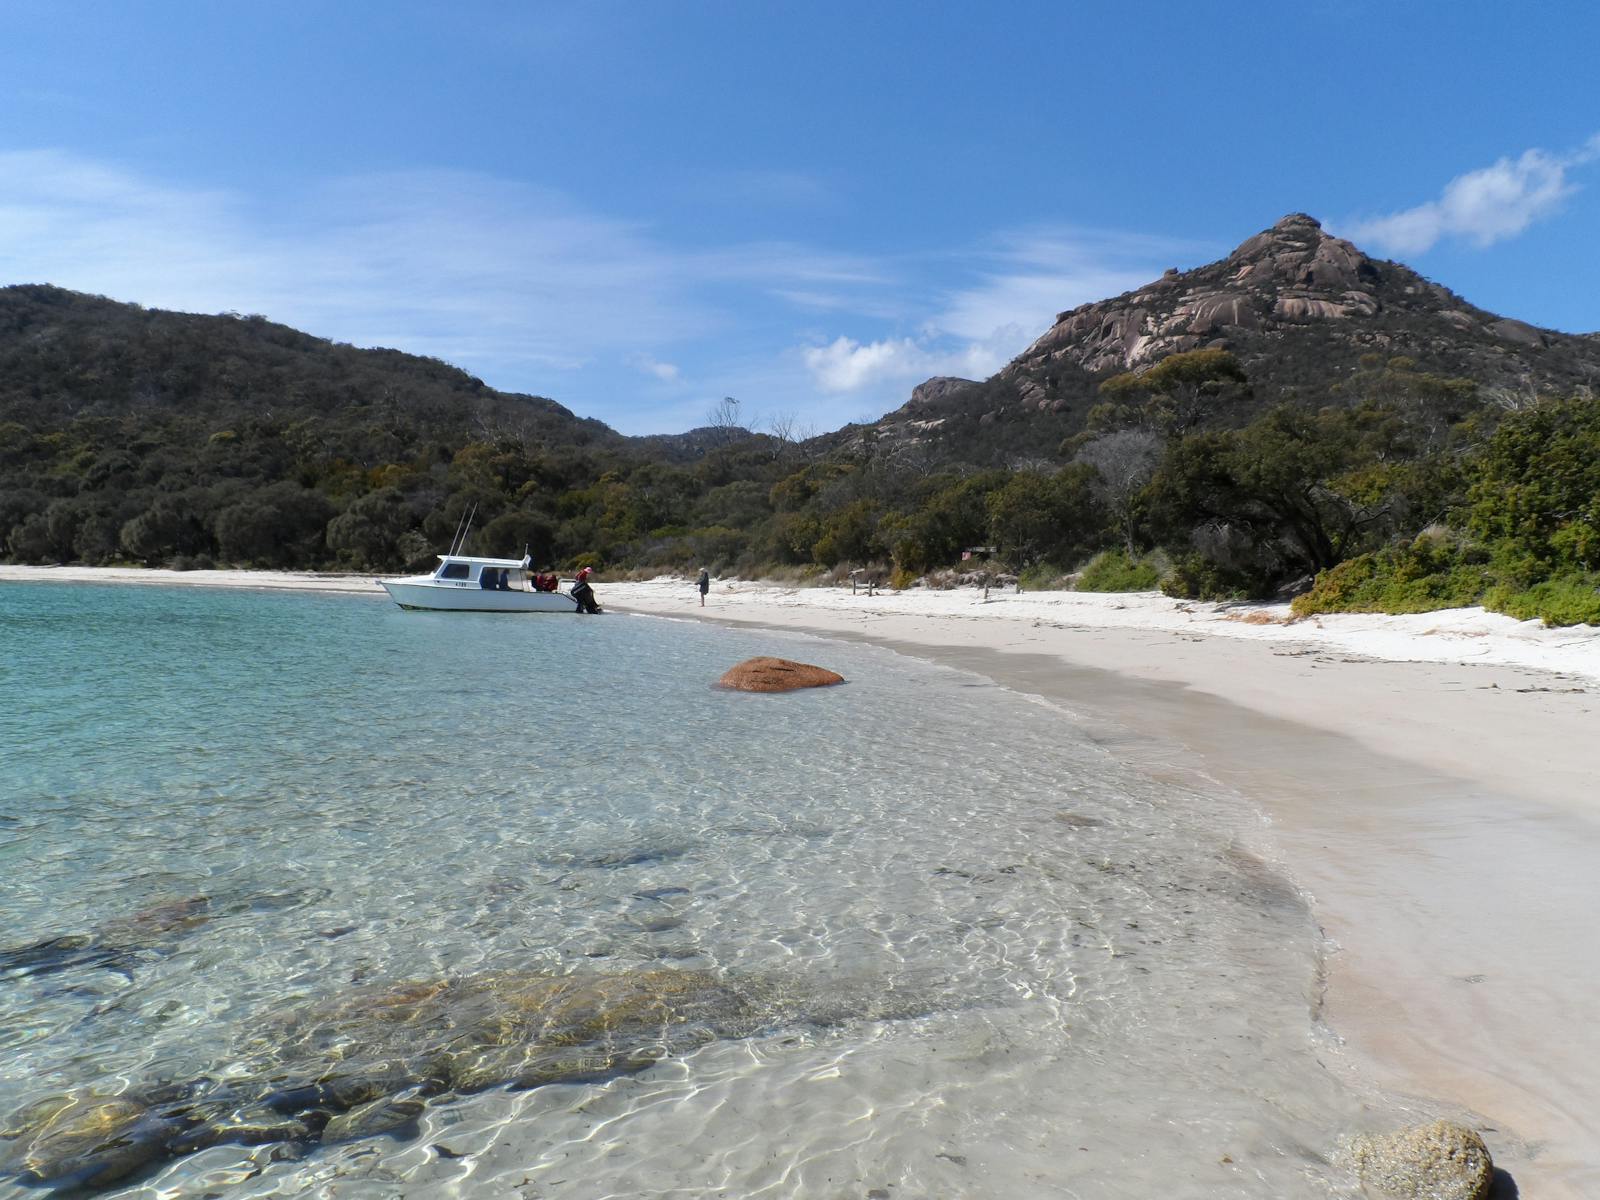 Walkers arrive at Schouten Island. The island is approx 1km off the southern tip of Freycinet .